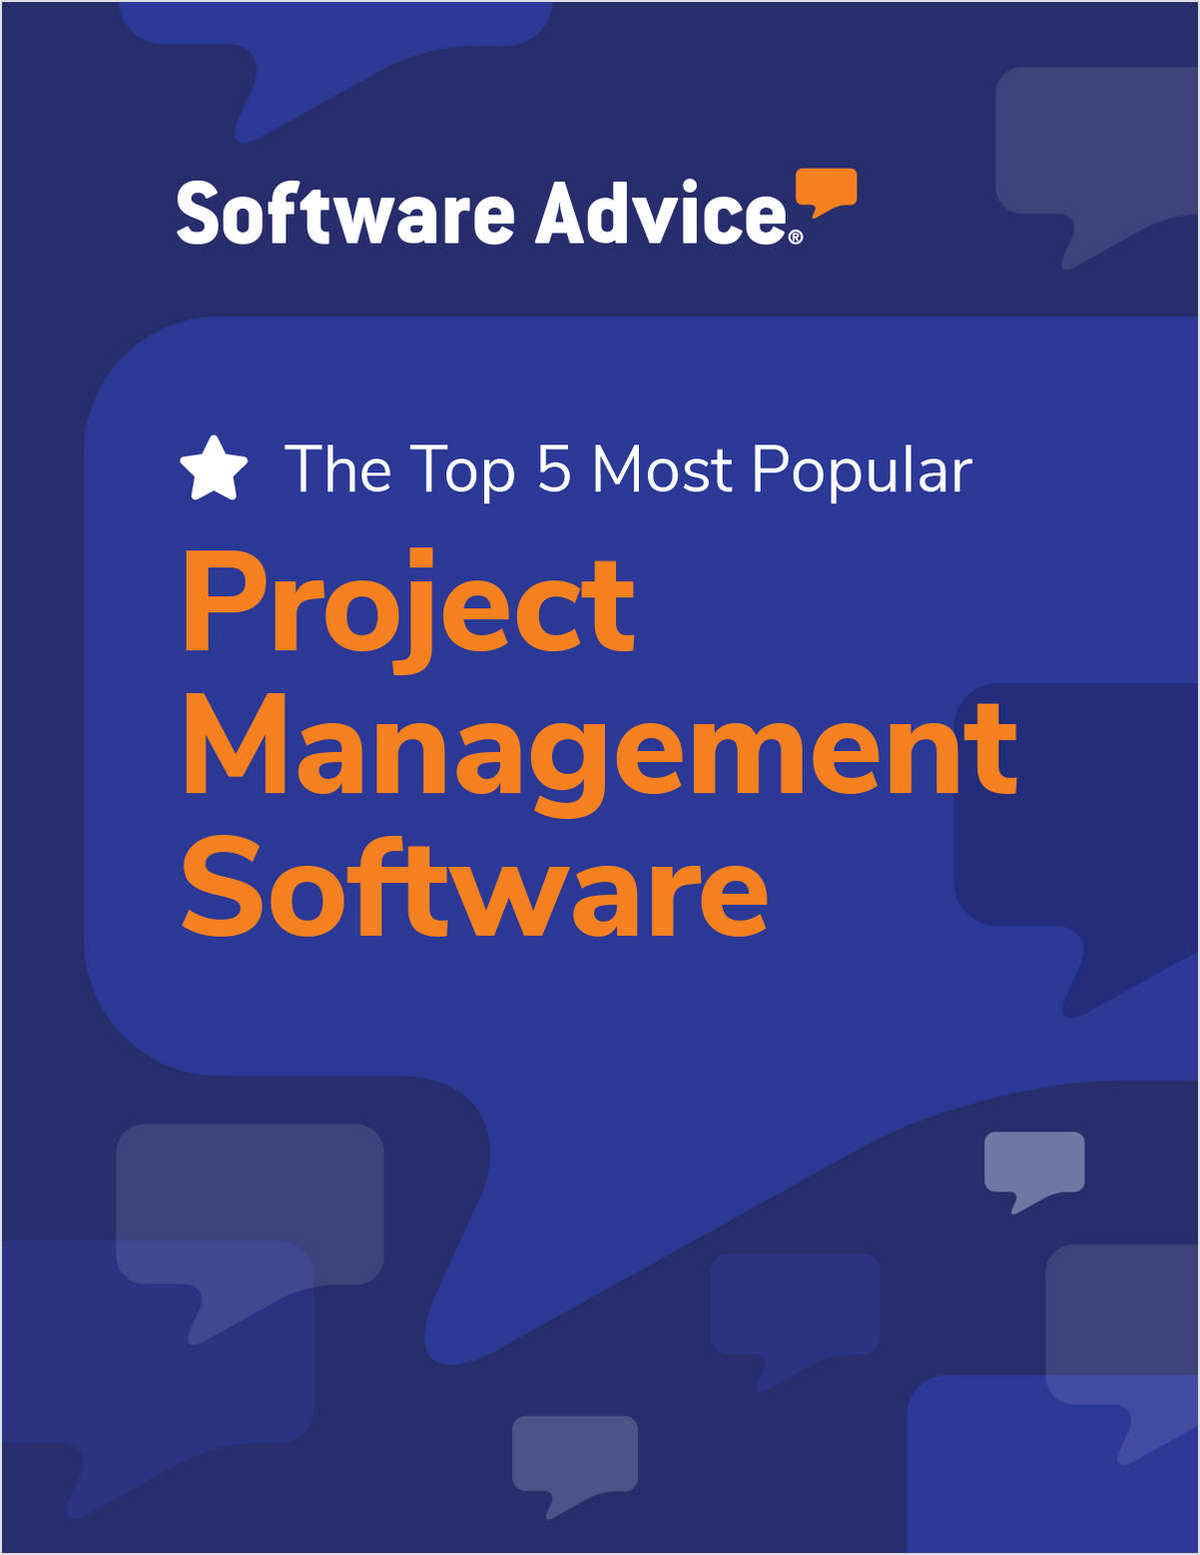 Software Advice's Top 5: Most Popular Project Management Software